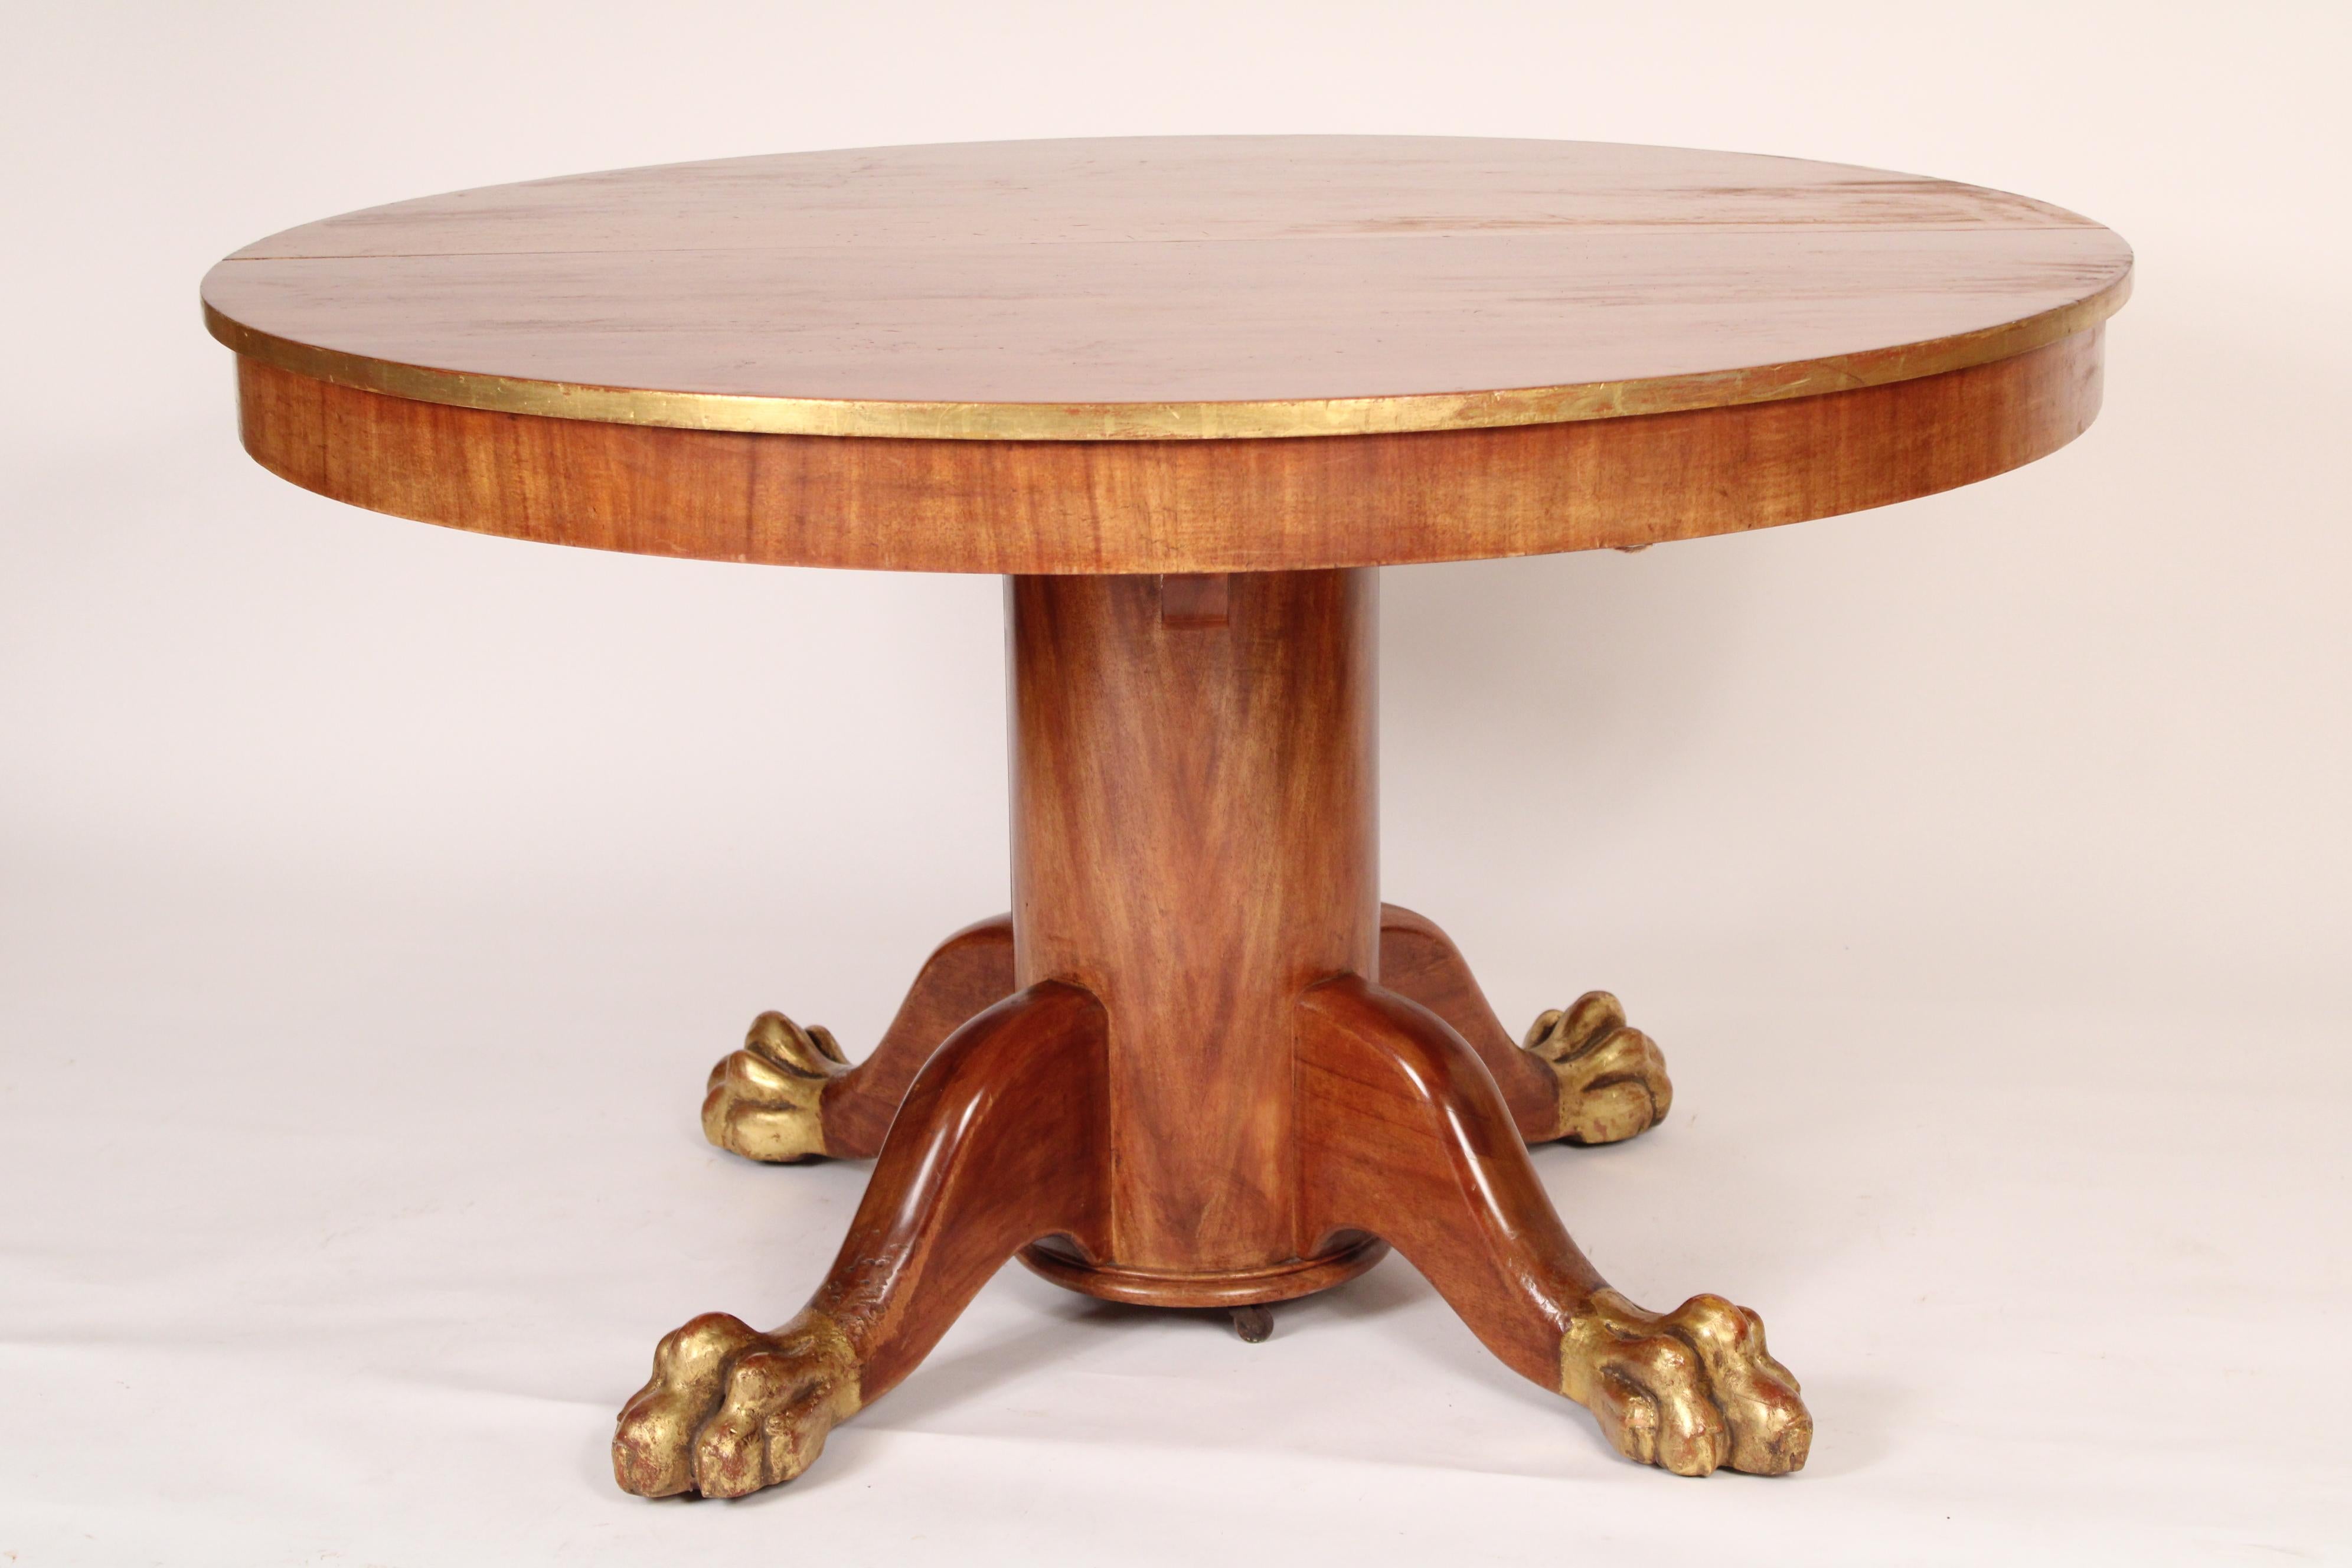 Antique Empire Style mahogany round dining room table with gilt highlights, circa 1900. With a round top that opens (No Leaves) gilt decoration on edge of table top, a round central pedestal, four legs ending in gilt decorated paw feet.